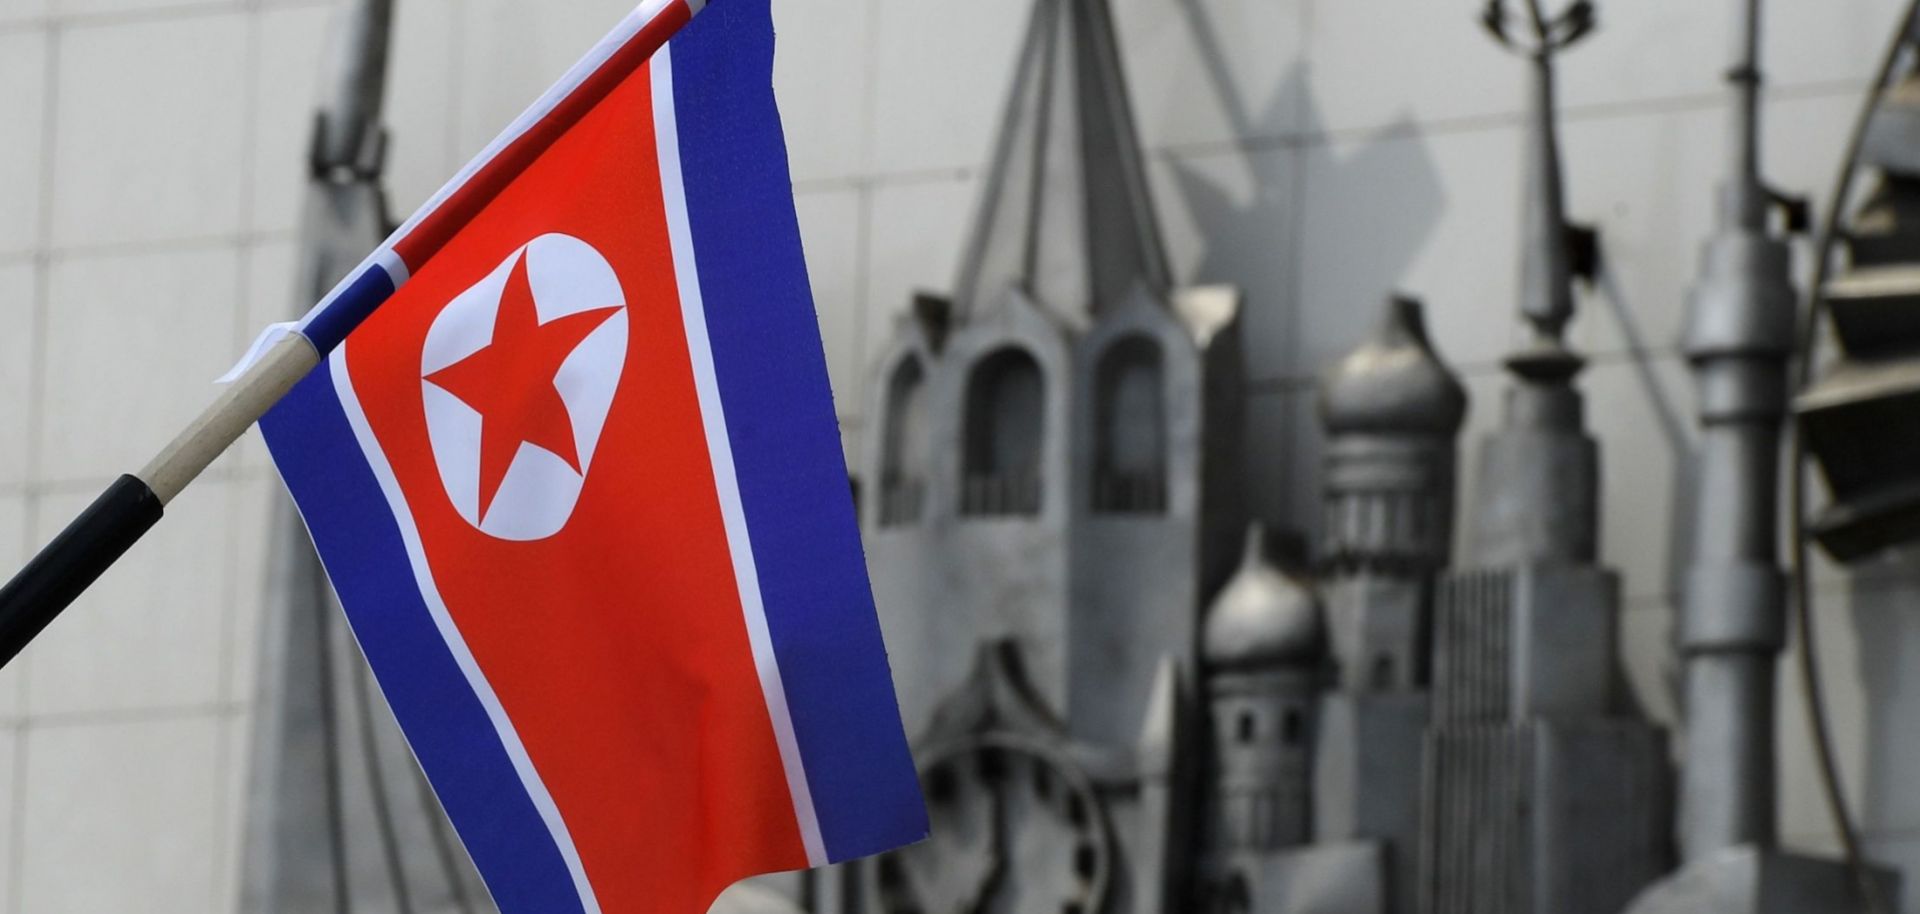 A North Korean flag is seen fixed on a lamp post in the far-eastern Russian port of Vladivostok on April 25, 2019. 